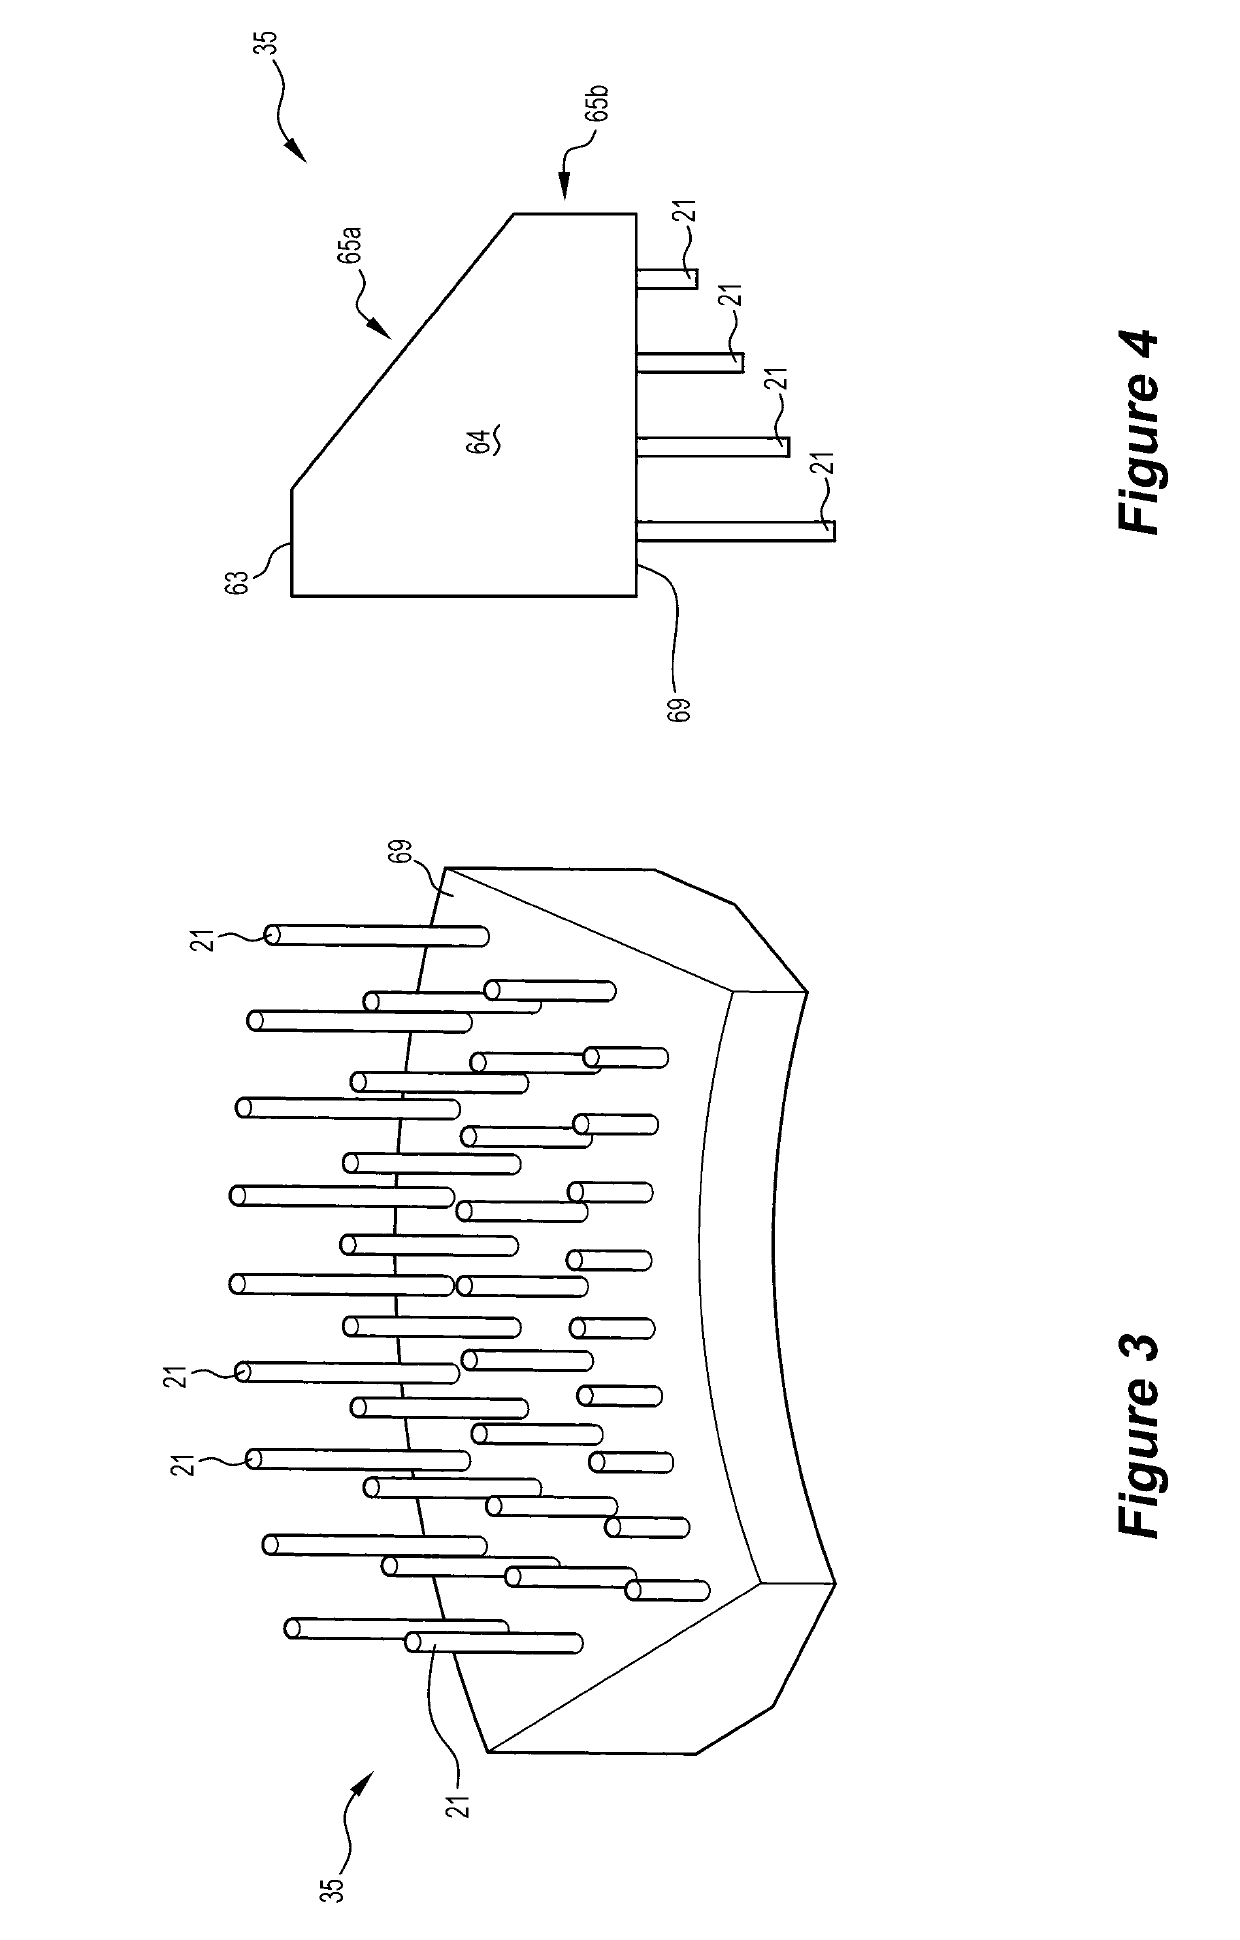 Smelting process and apparatus